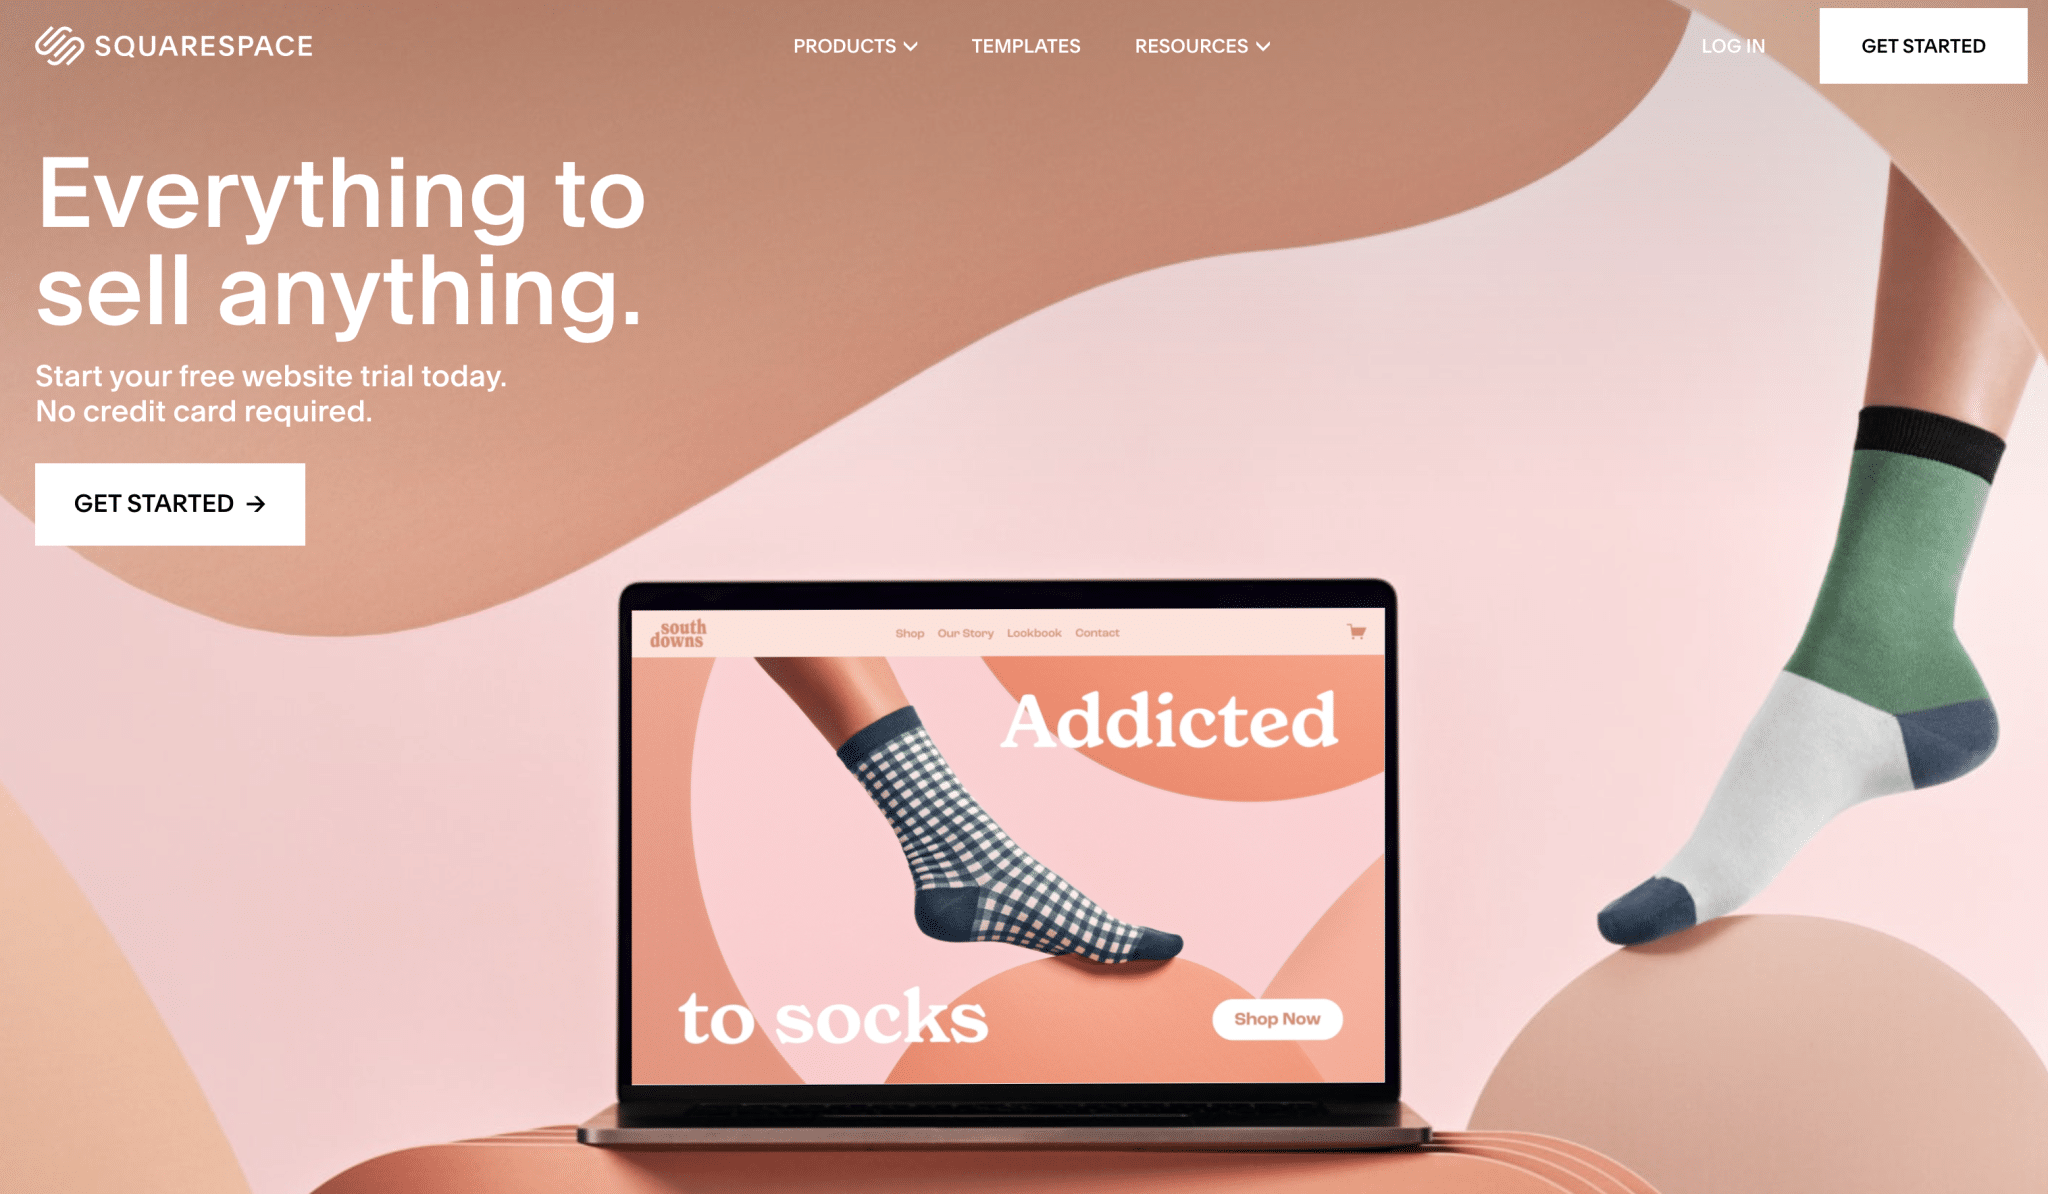 Squarespace allows you to create a showcase site and an ecommerce site.